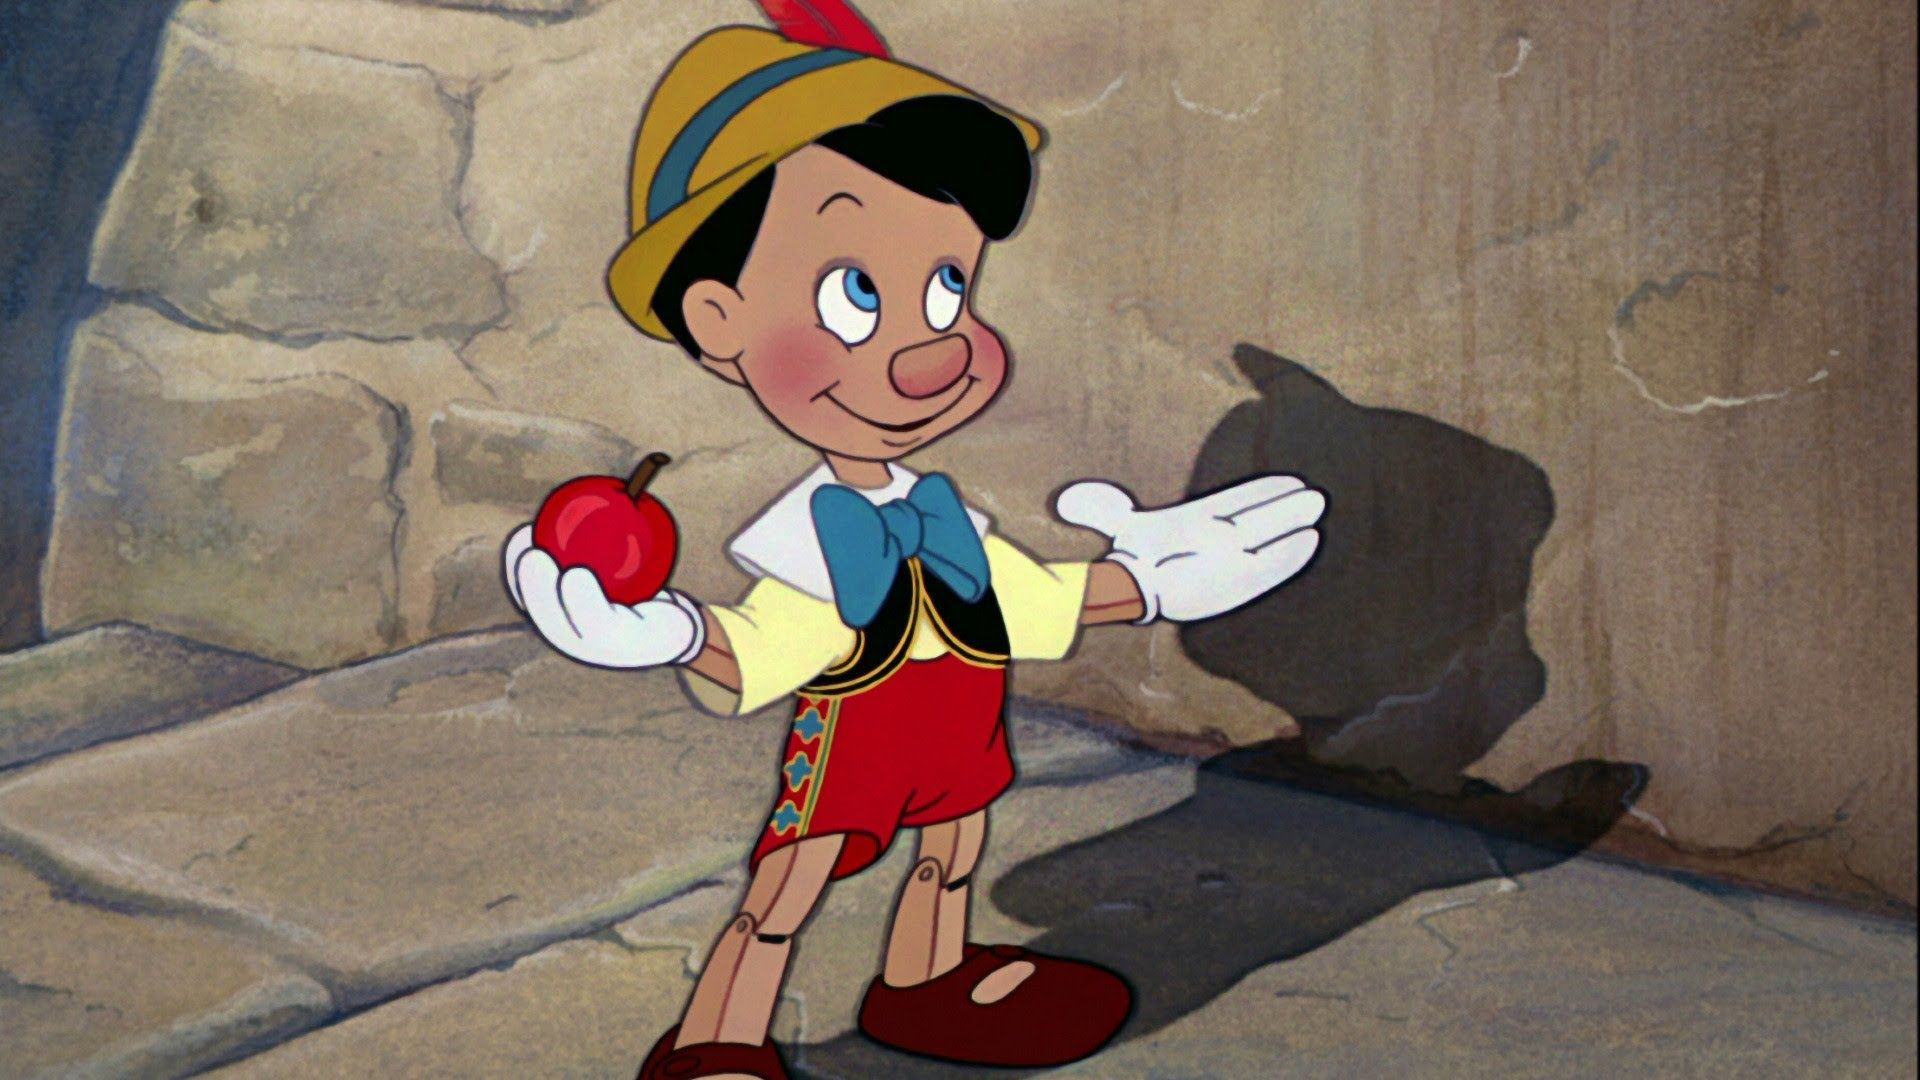 1920x1080 Disney+'s Pinocchio announces release date with first phot